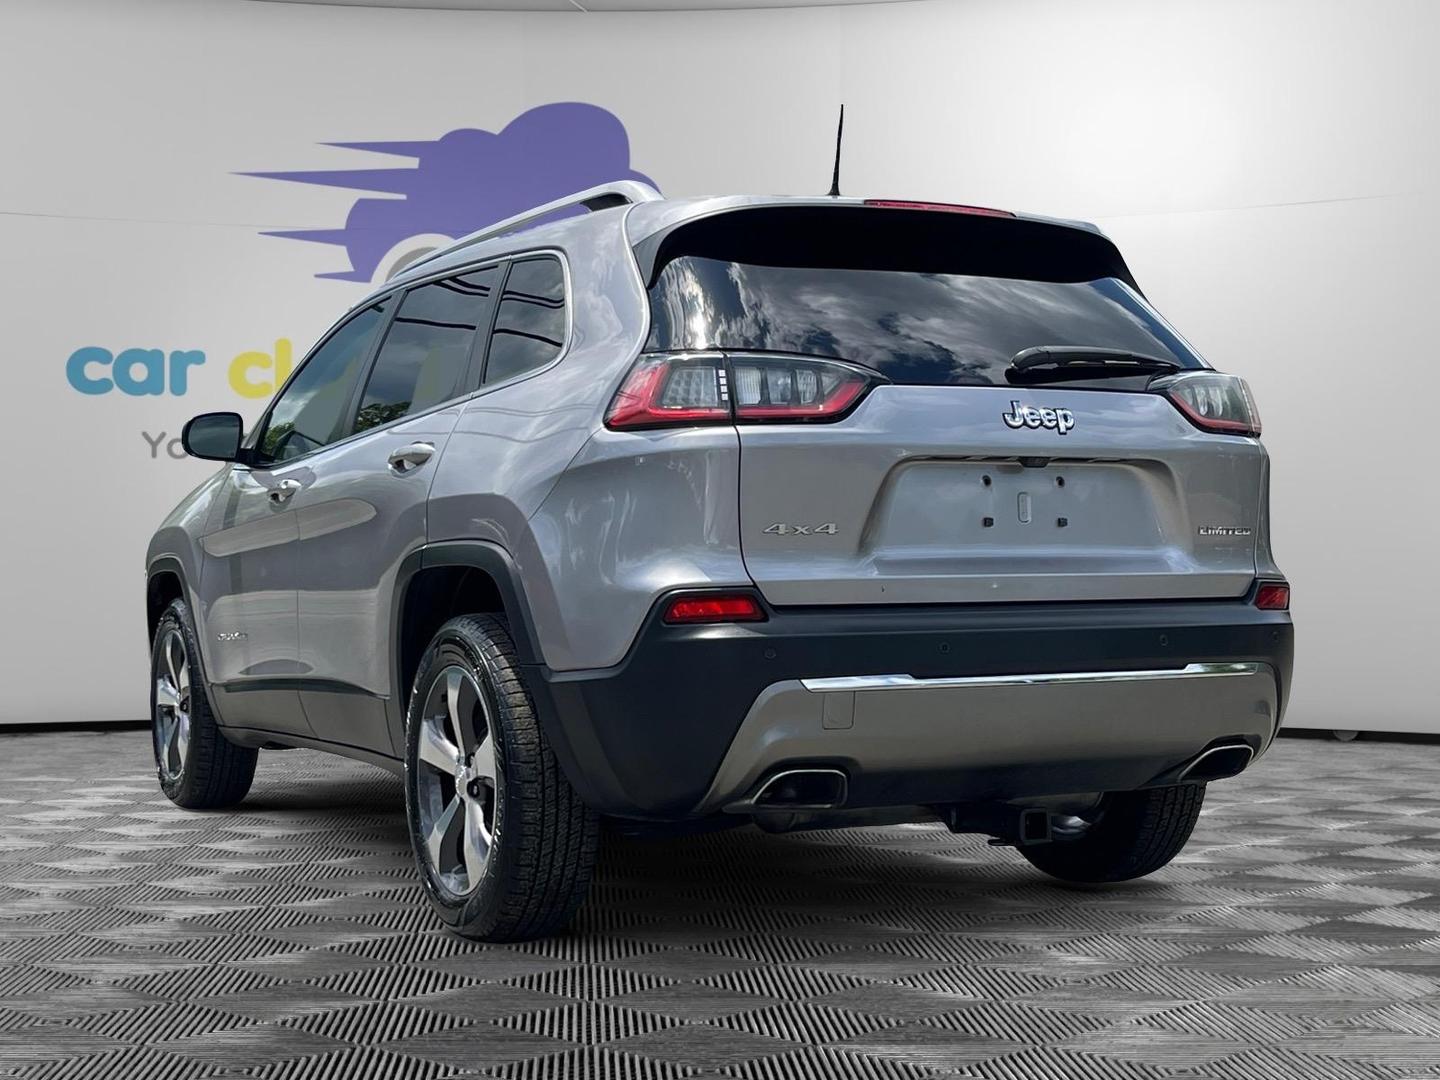 2019 Jeep Cherokee Utility 4d Limited 4wd 3.2l V6 - Image 3